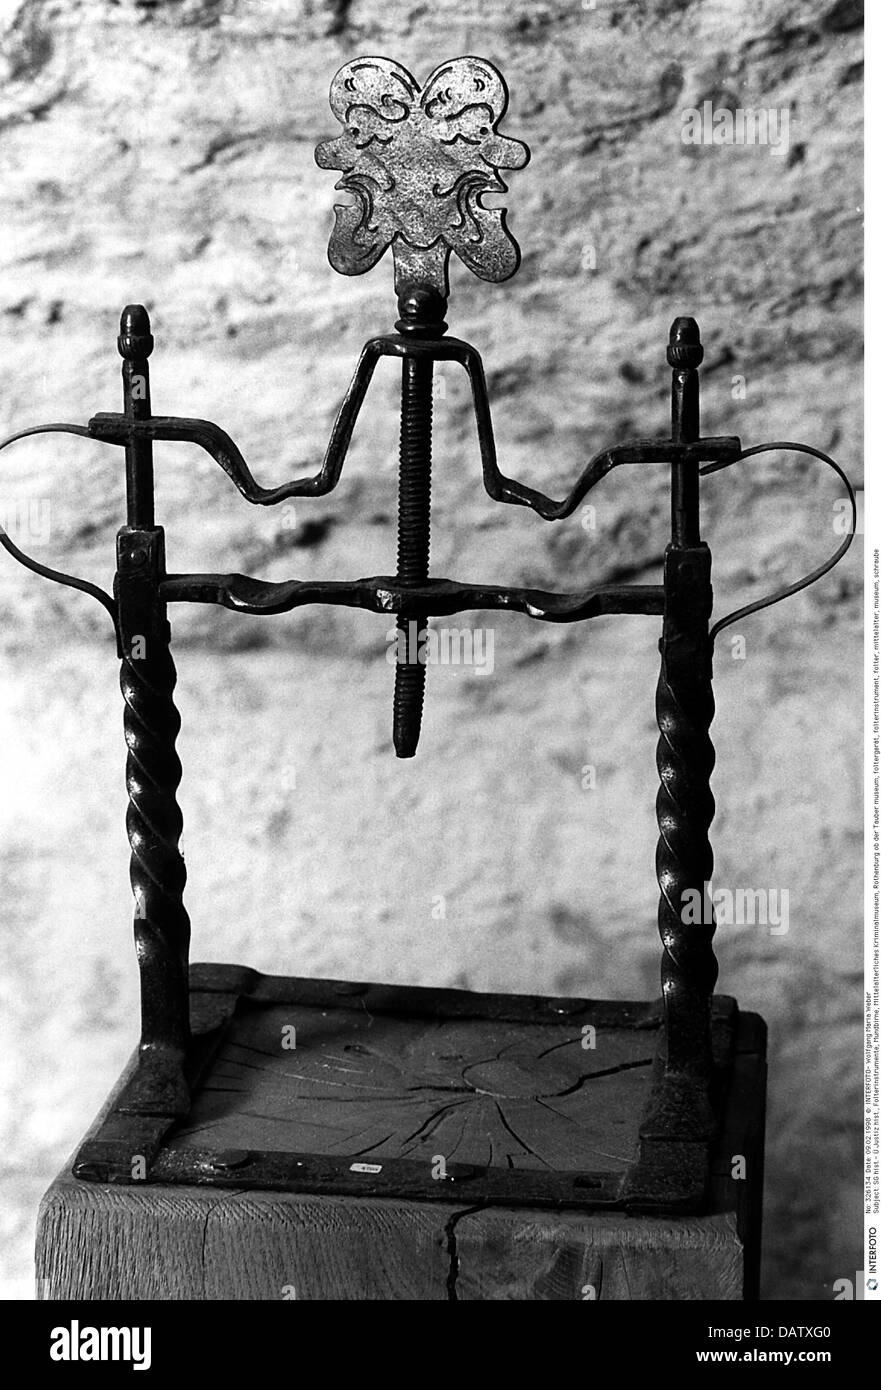 justice, instrument of choke pear, museum of medieval crimes, Rothenburg ob der Tauber, historic, historical, thumbscrews, torture instruments of torture, torture devices, times, Middle Ages, technics, pear of anguish,